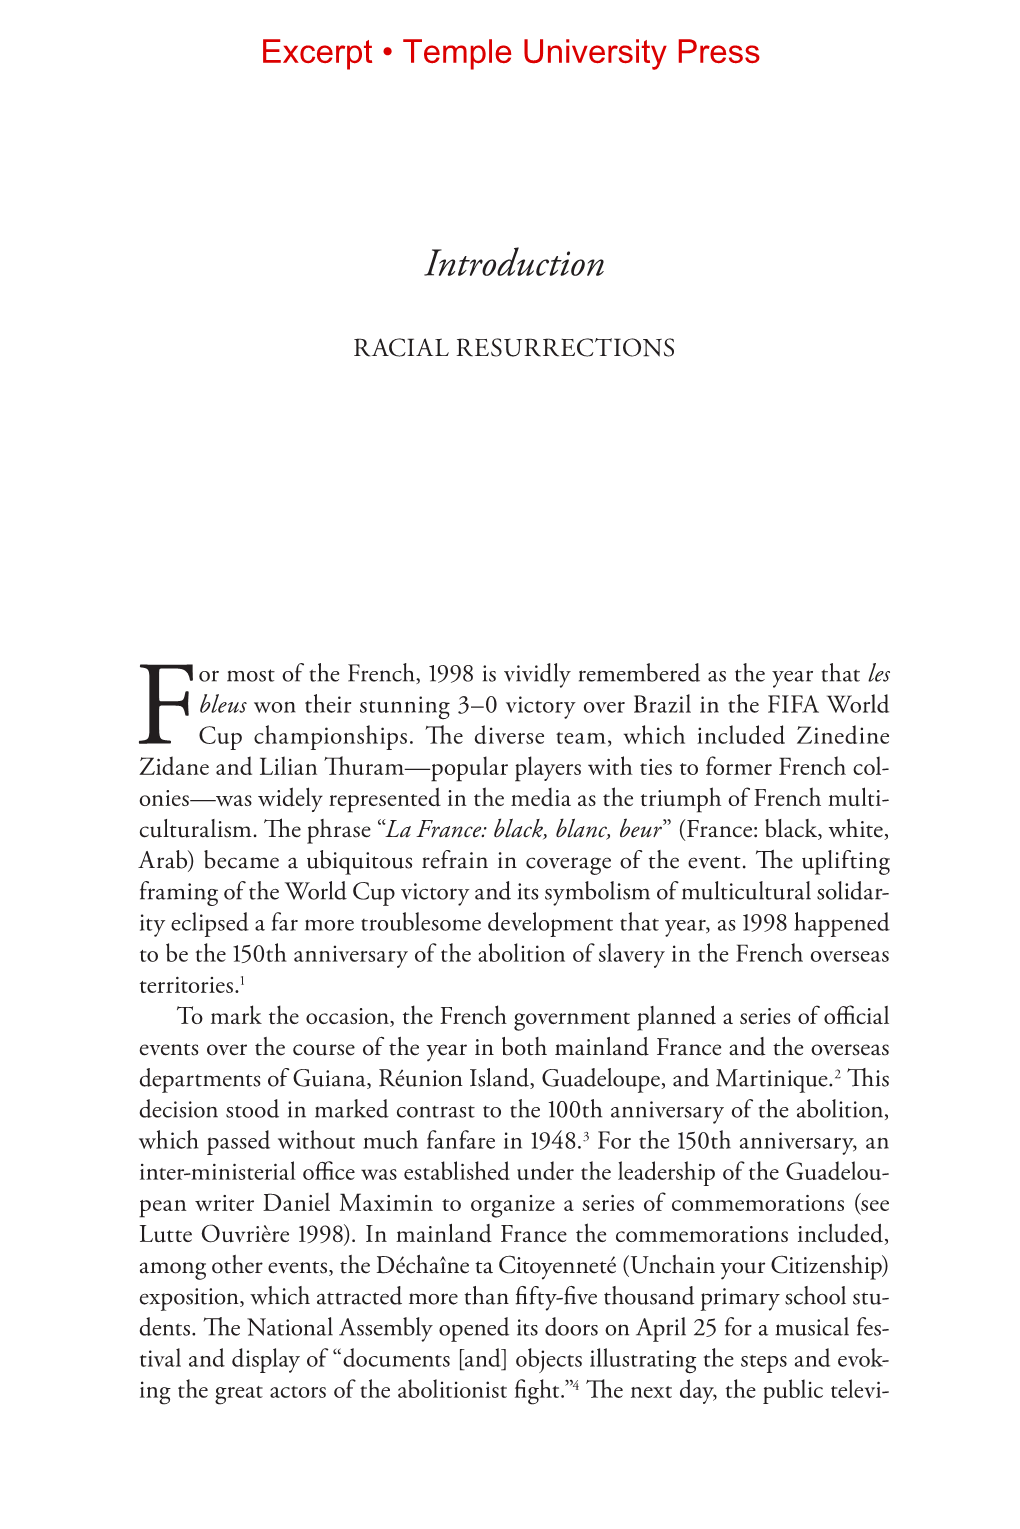 Resurrecting Slavery: Racial Legacies and White Supremacy in France